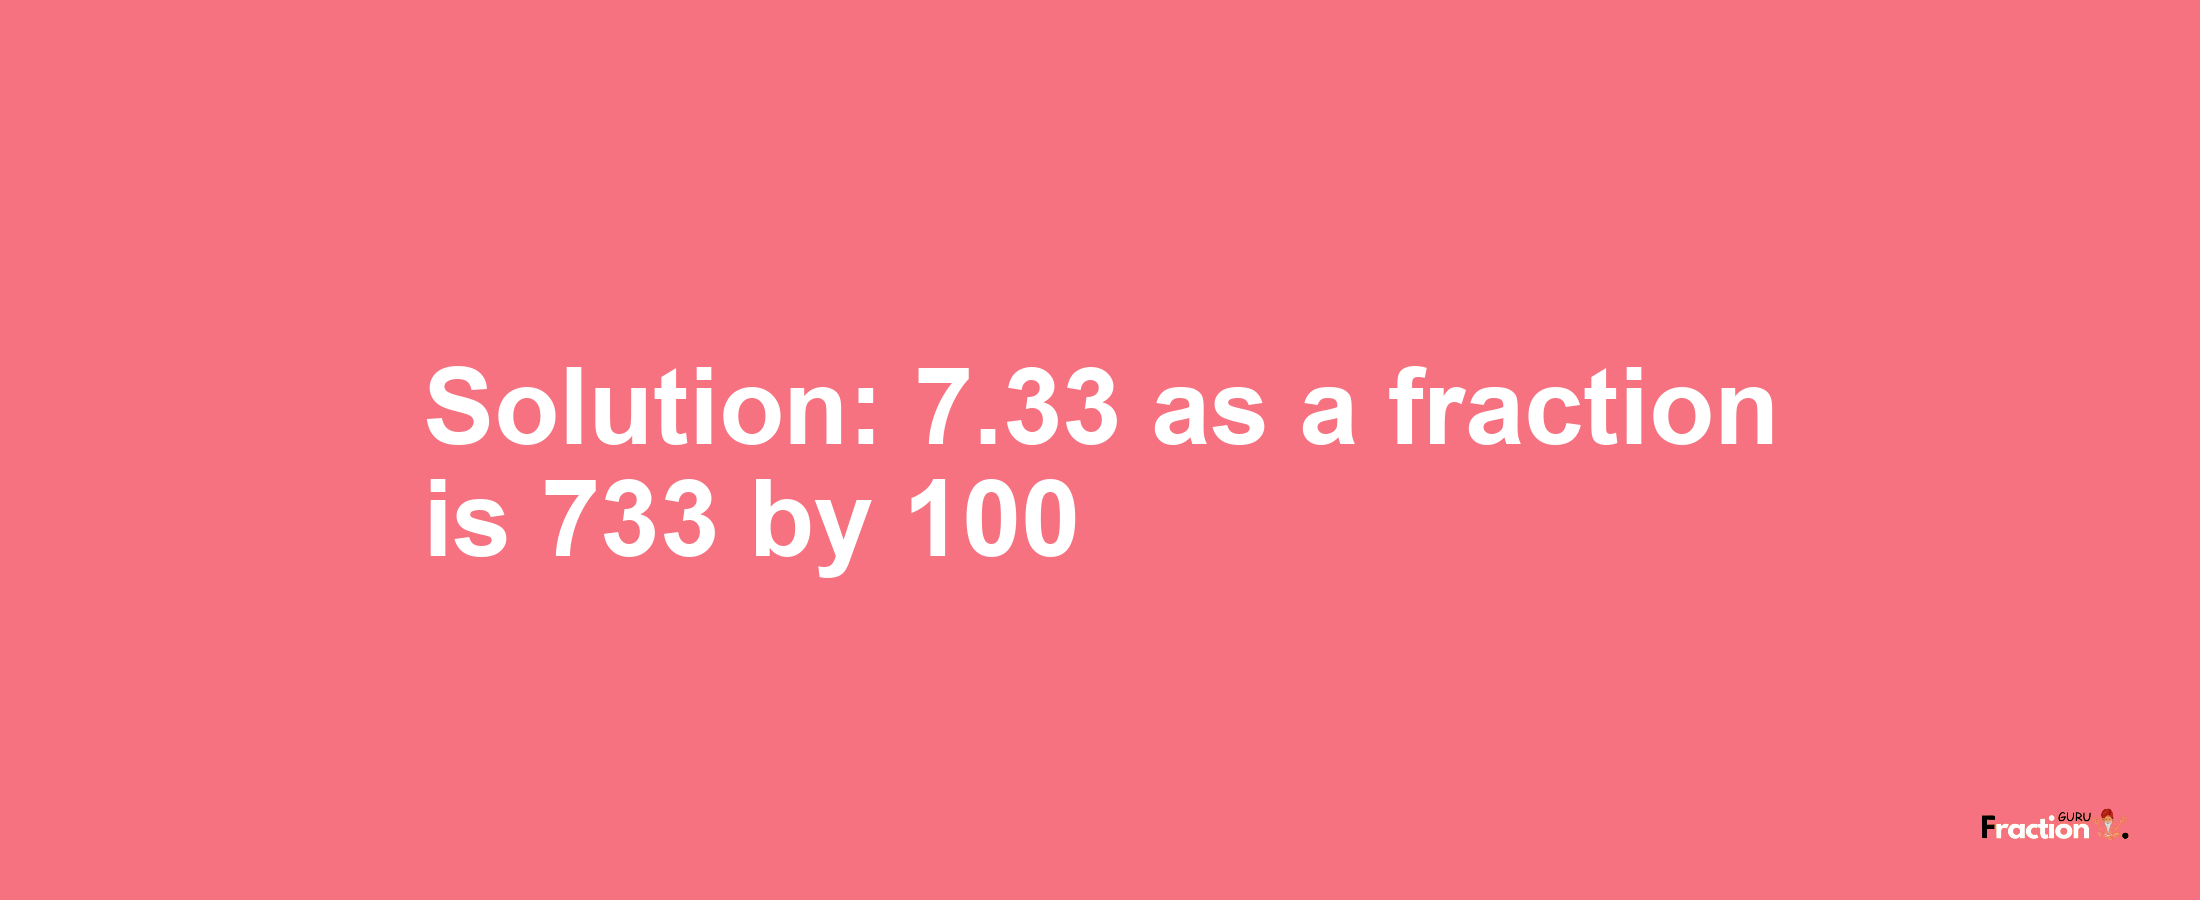 Solution:7.33 as a fraction is 733/100